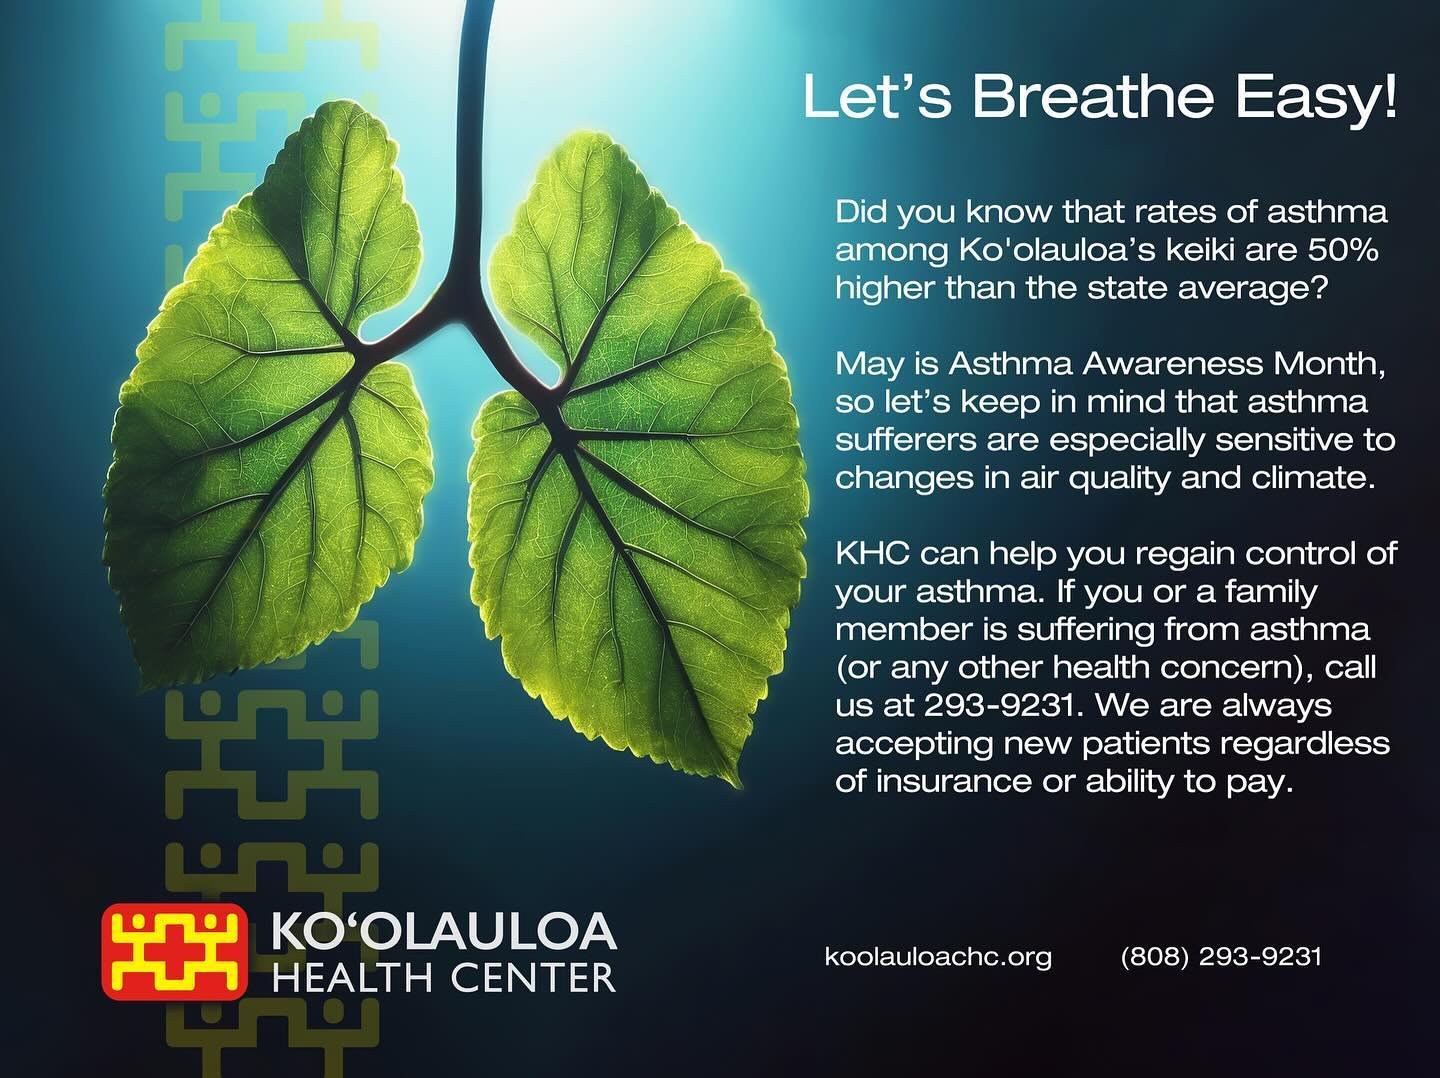 Aloha &lsquo;Ohana,

Did you know that rates of asthma among Ko&rsquo;olauloa&rsquo;s keiki are 50% higher than the state average?

May is Asthma Awareness Month, so let&rsquo;s keep in mind that asthma sufferers are especially sensitive to changes i